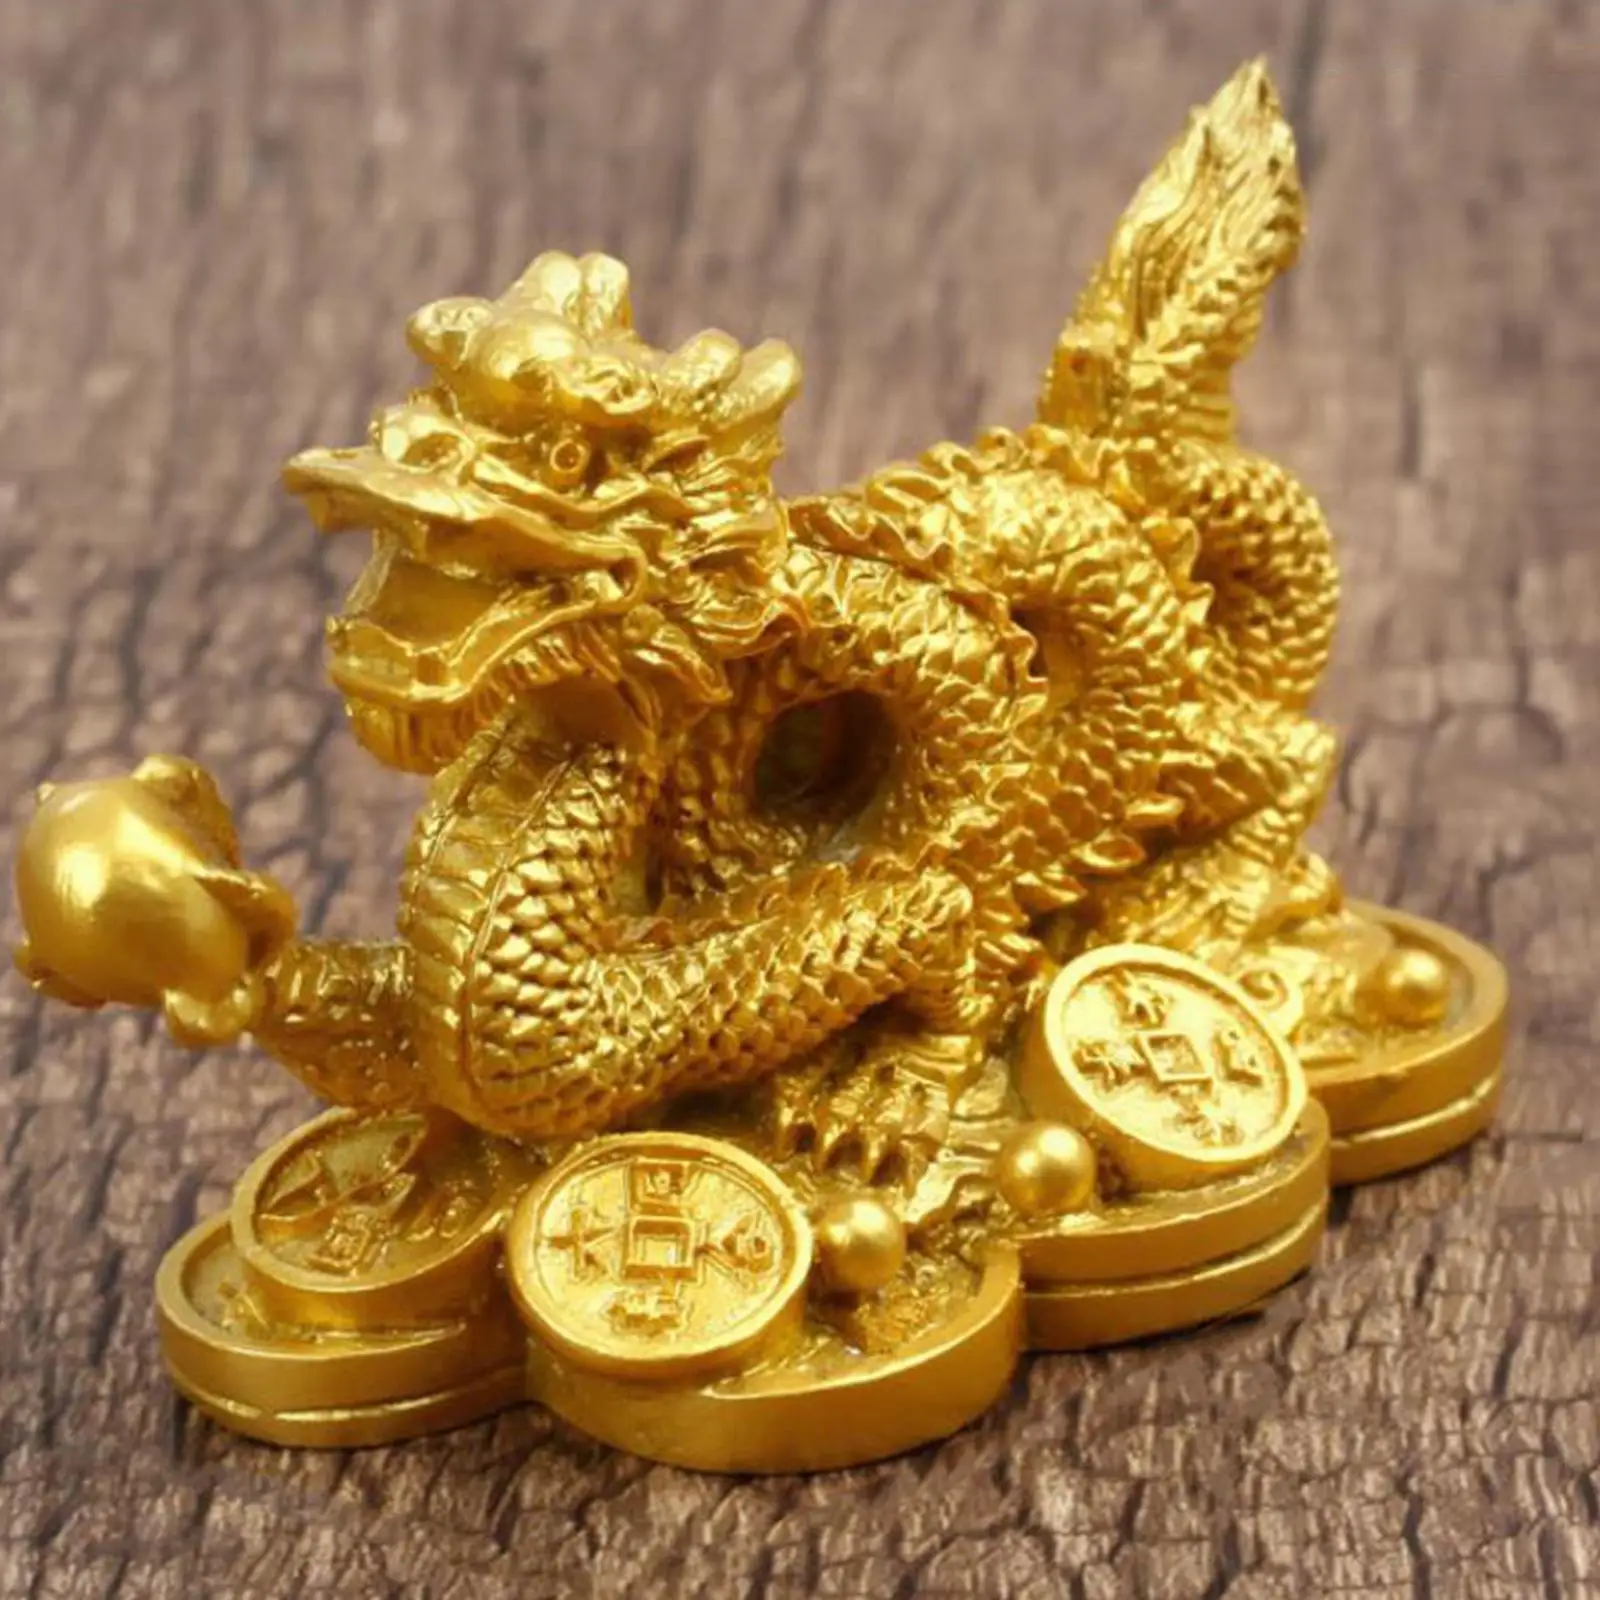 Chinese Feng Shui Dragon Figurines Luck Success Blessing Peace and Wealth